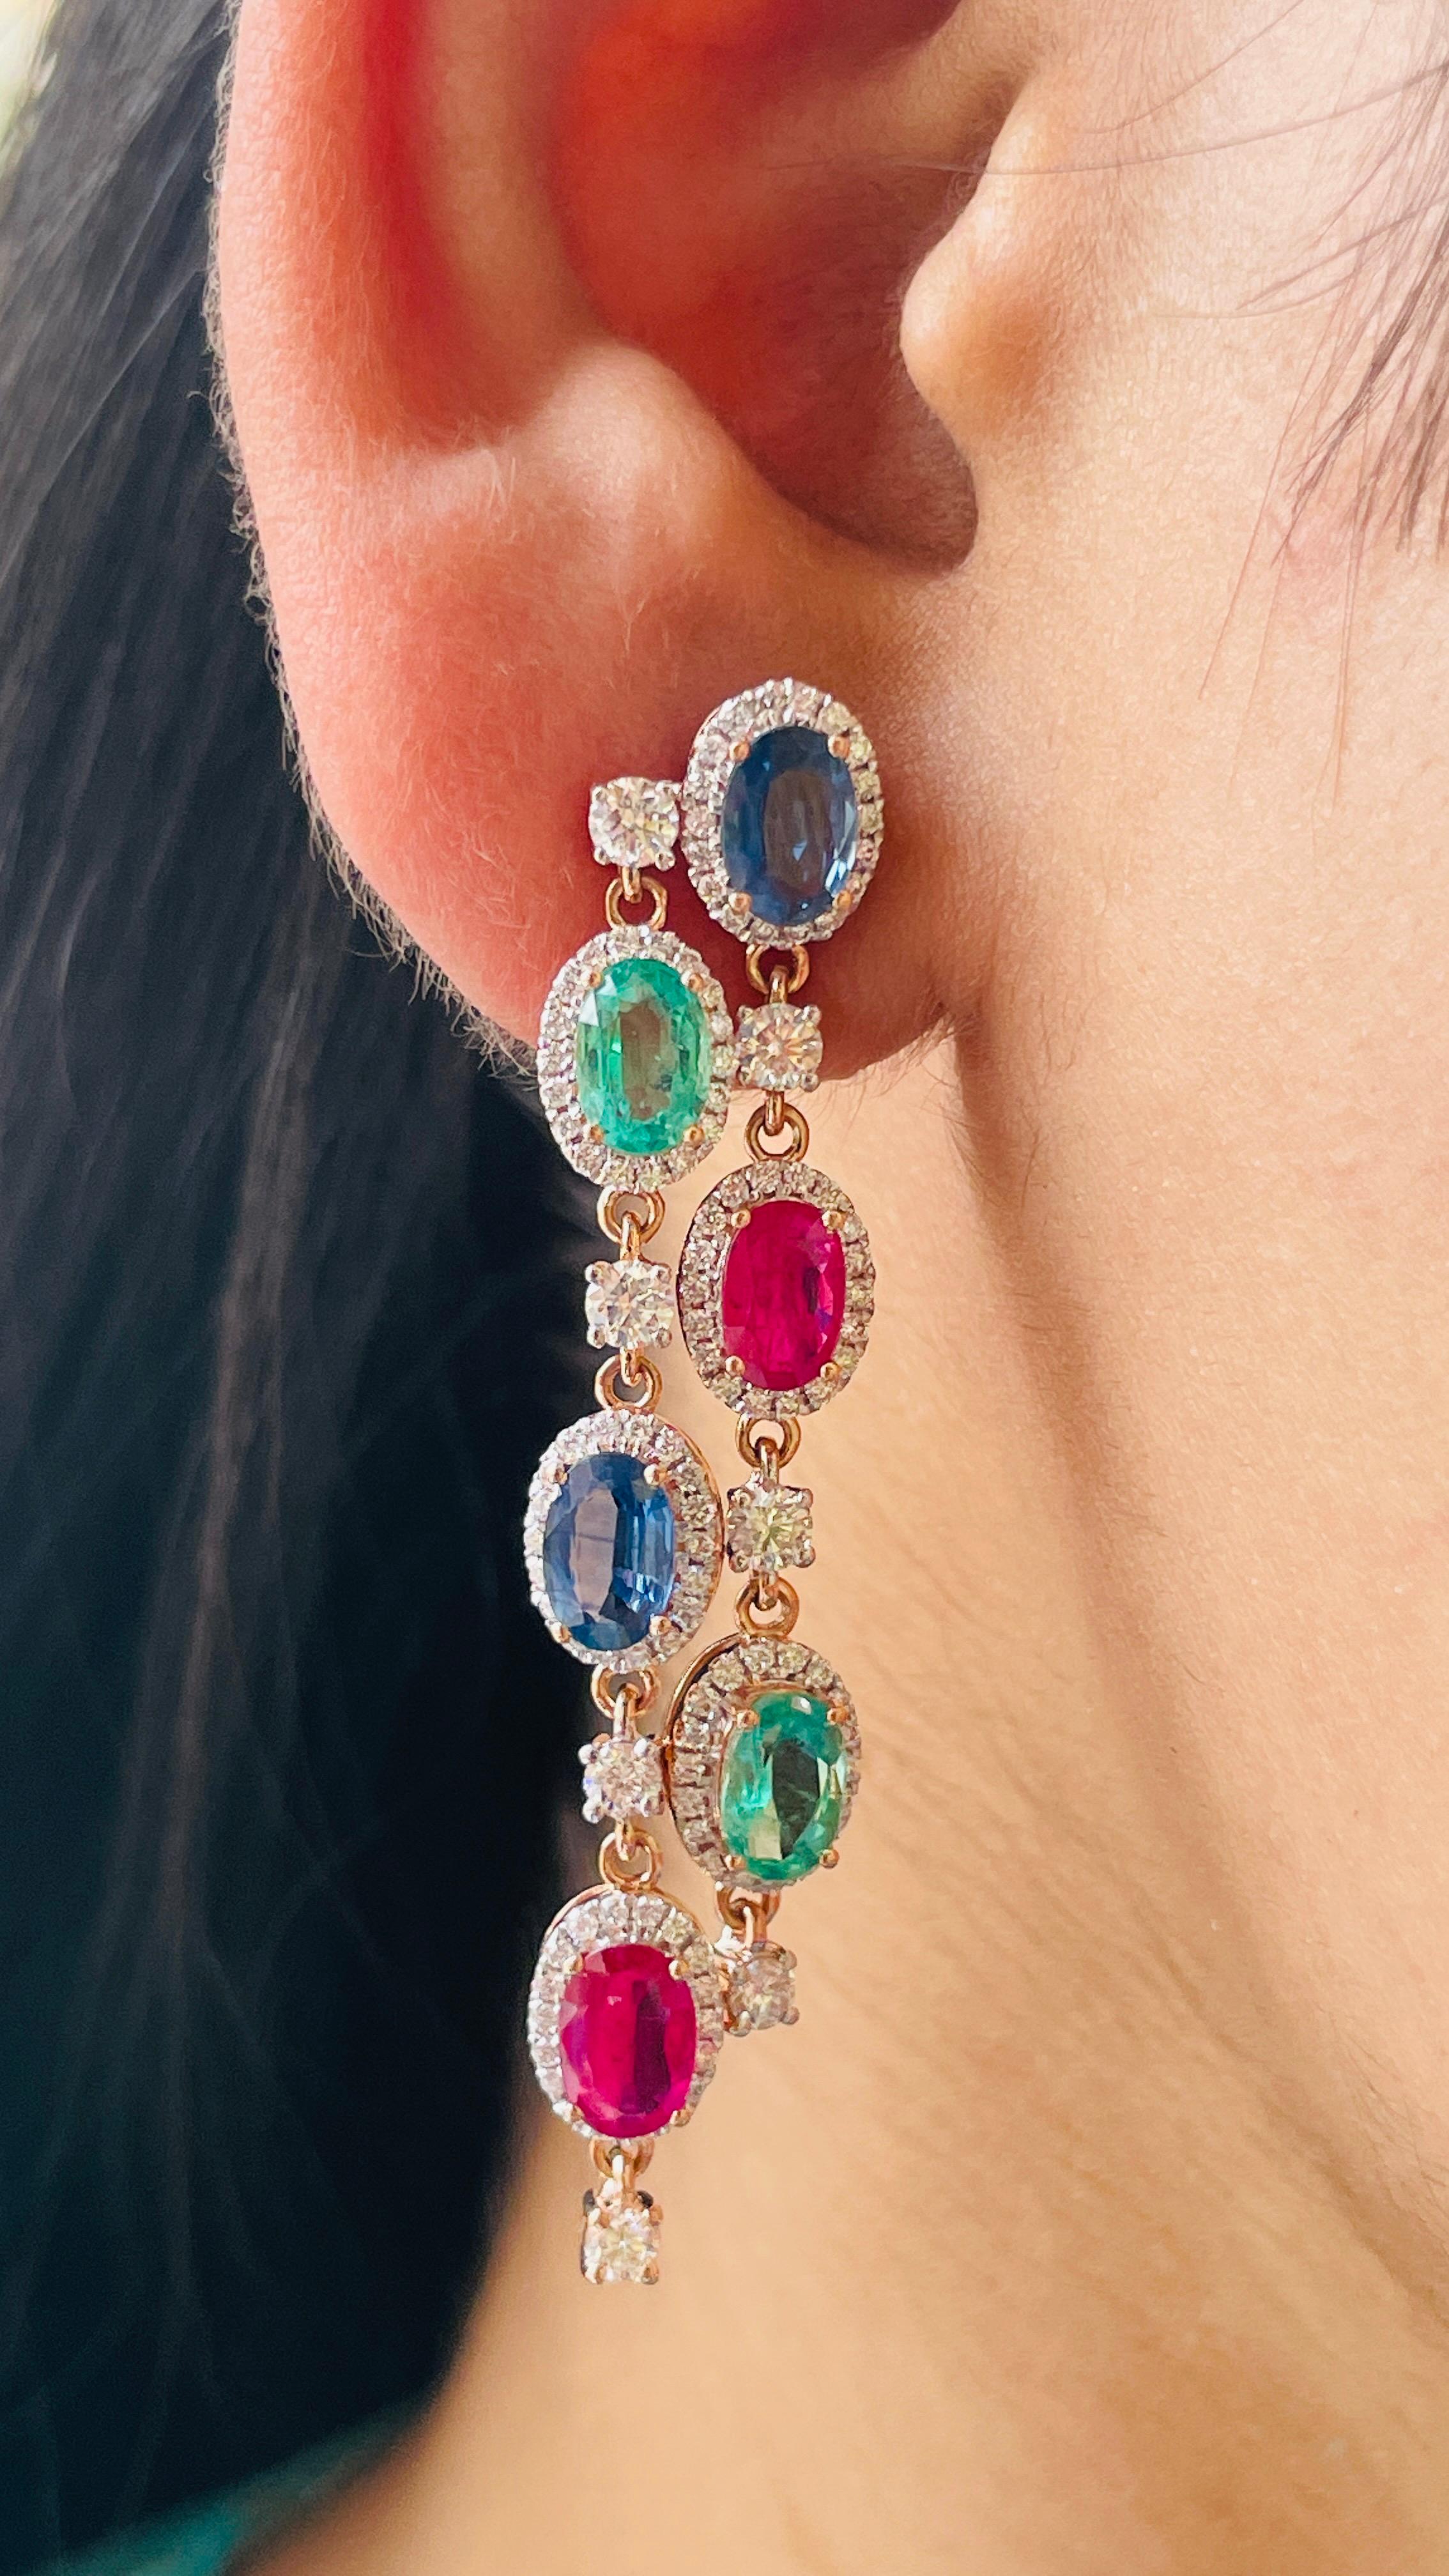 Emerald, Ruby and Blue Sapphire Dangle earrings with diamonds to make a statement with your look. These earrings create a sparkling, luxurious look featuring oval cut gemstone.
If you love to gravitate towards unique styles, this piece of jewelry is